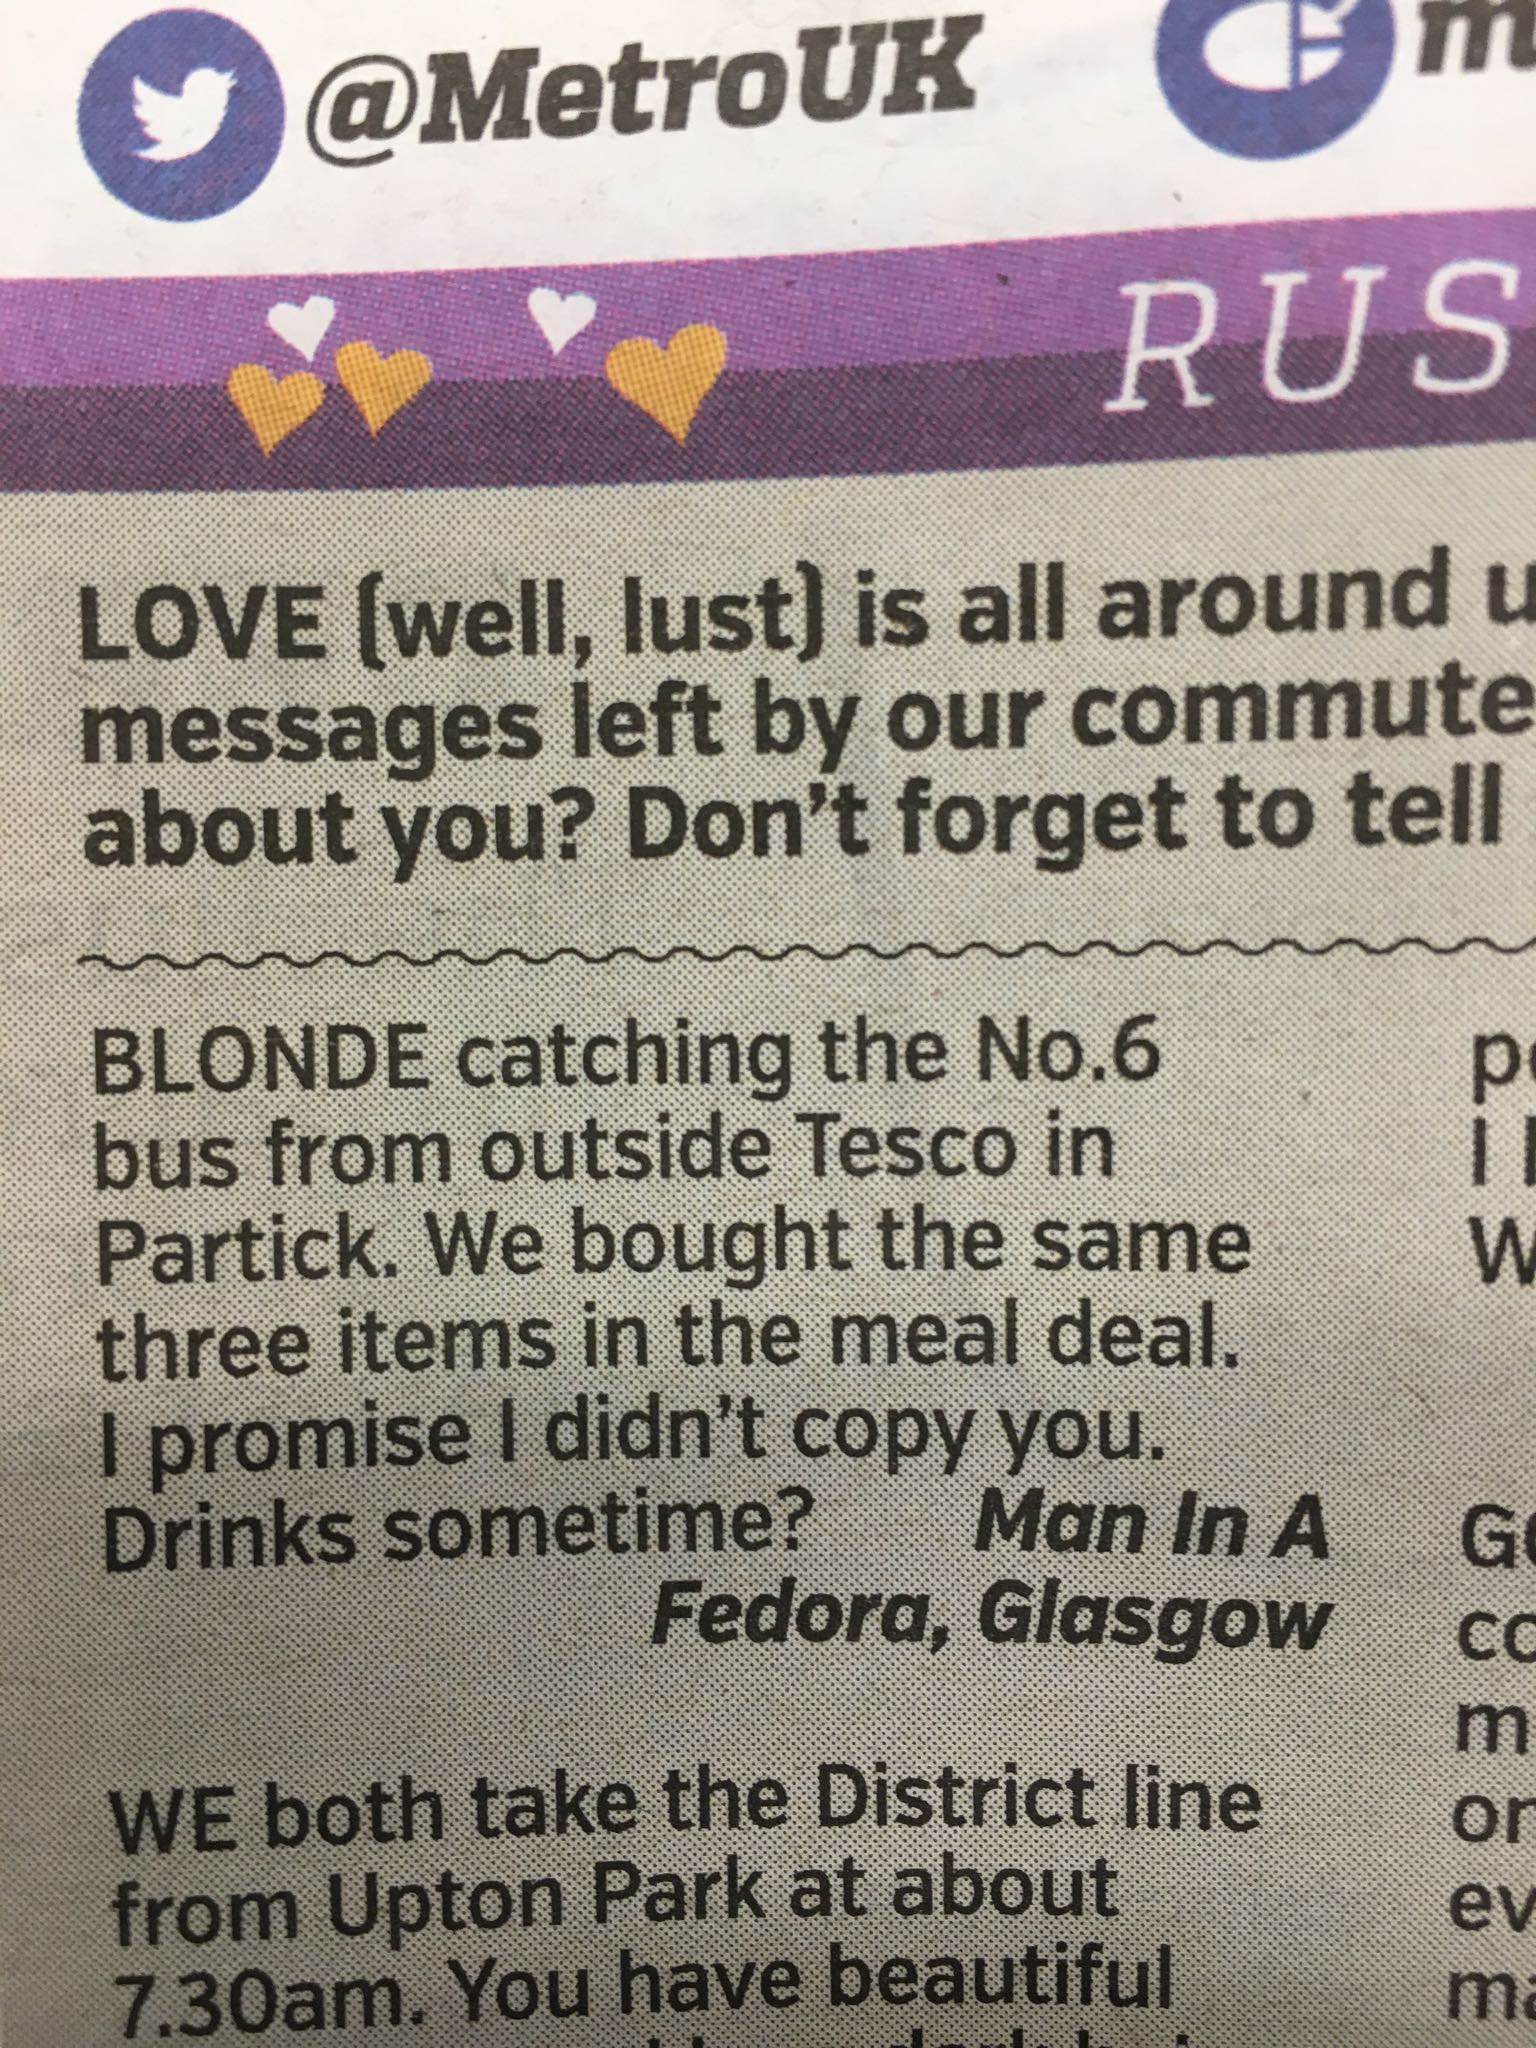 em Rus Love well, lust is all around u messages left by our commute about you? Don't forget to tell W Blonde catching the No.6 bus from outside Tesco in Partick. We bought the same three items in the meal deal. I promise I didn't copy you. Drinks sometime